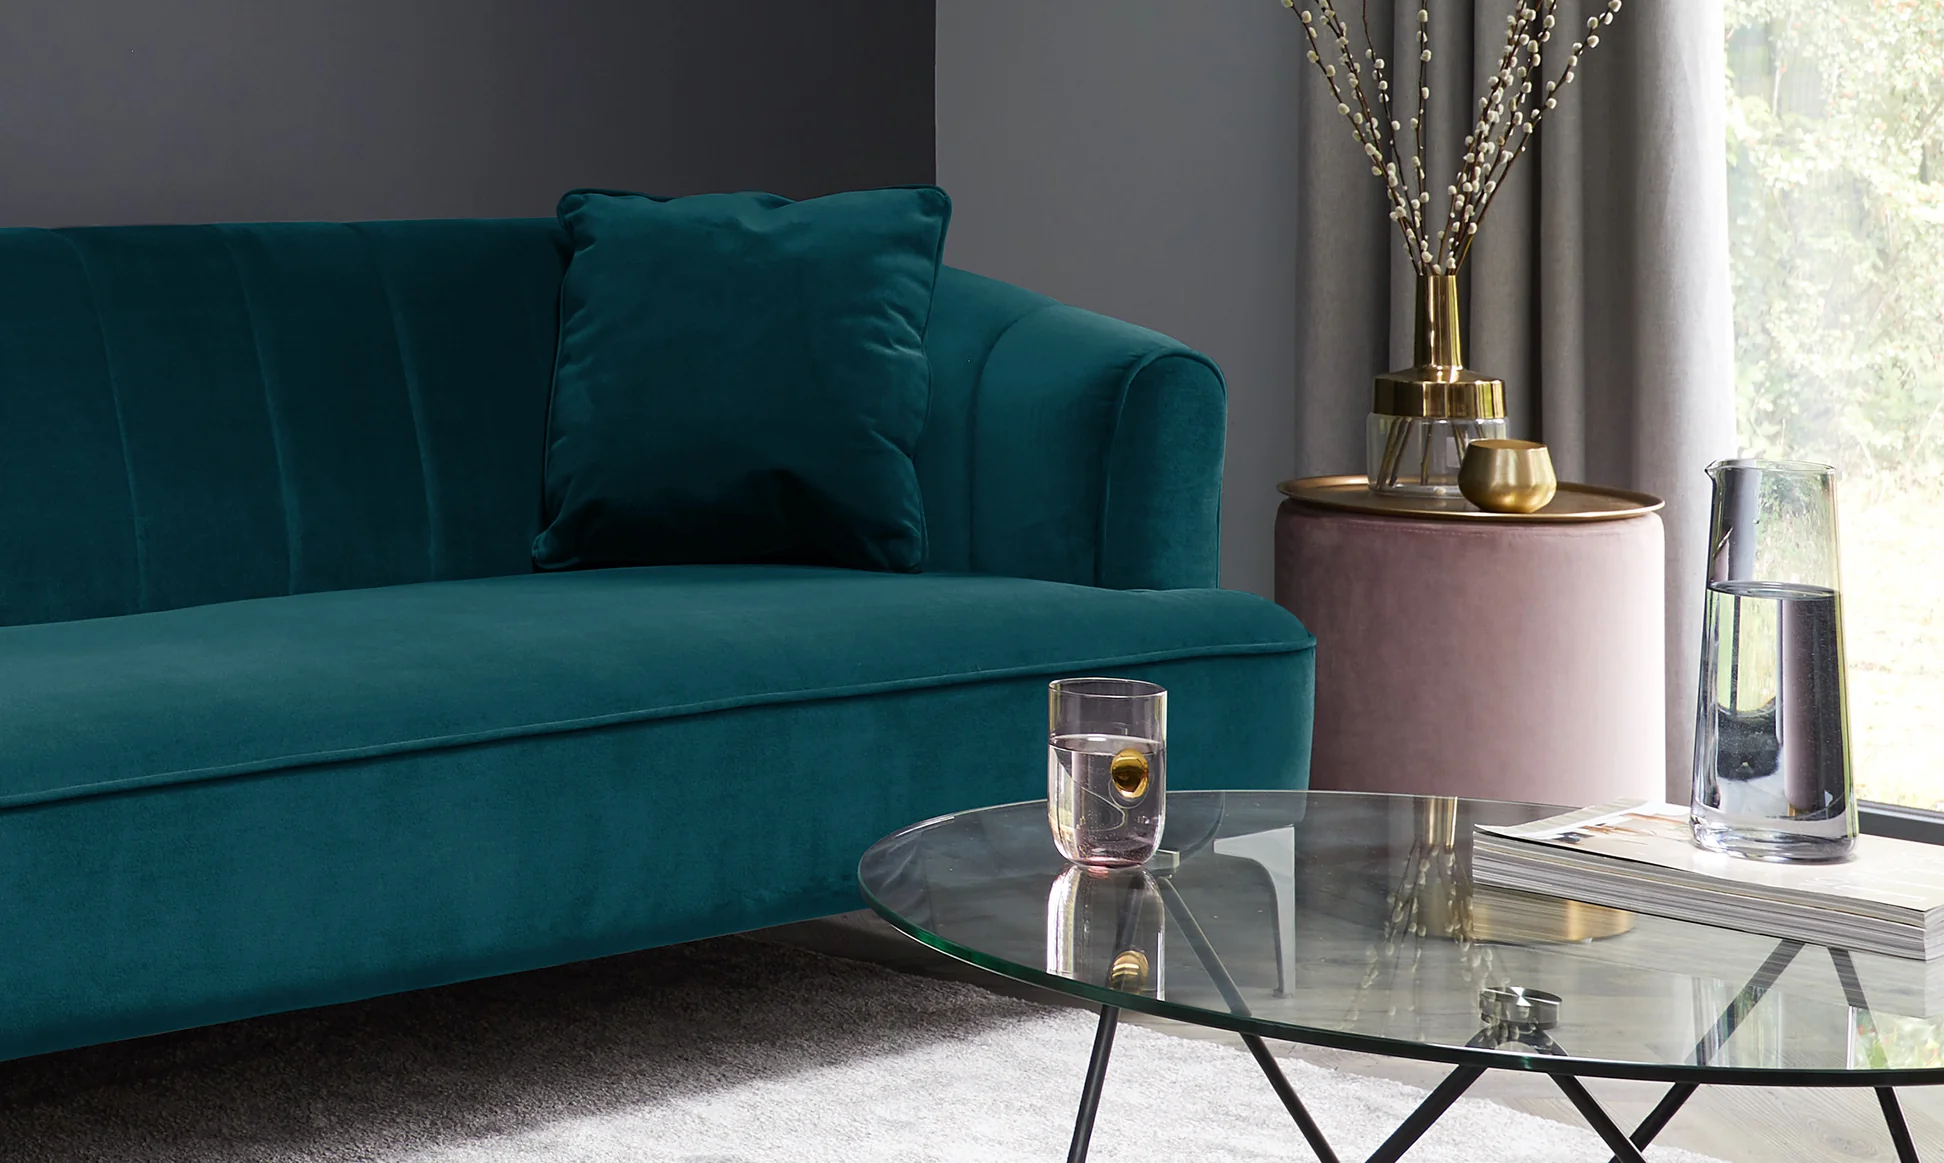 A teal sofa in velvet accentuates the textural contract between velvet and the glass coffee table